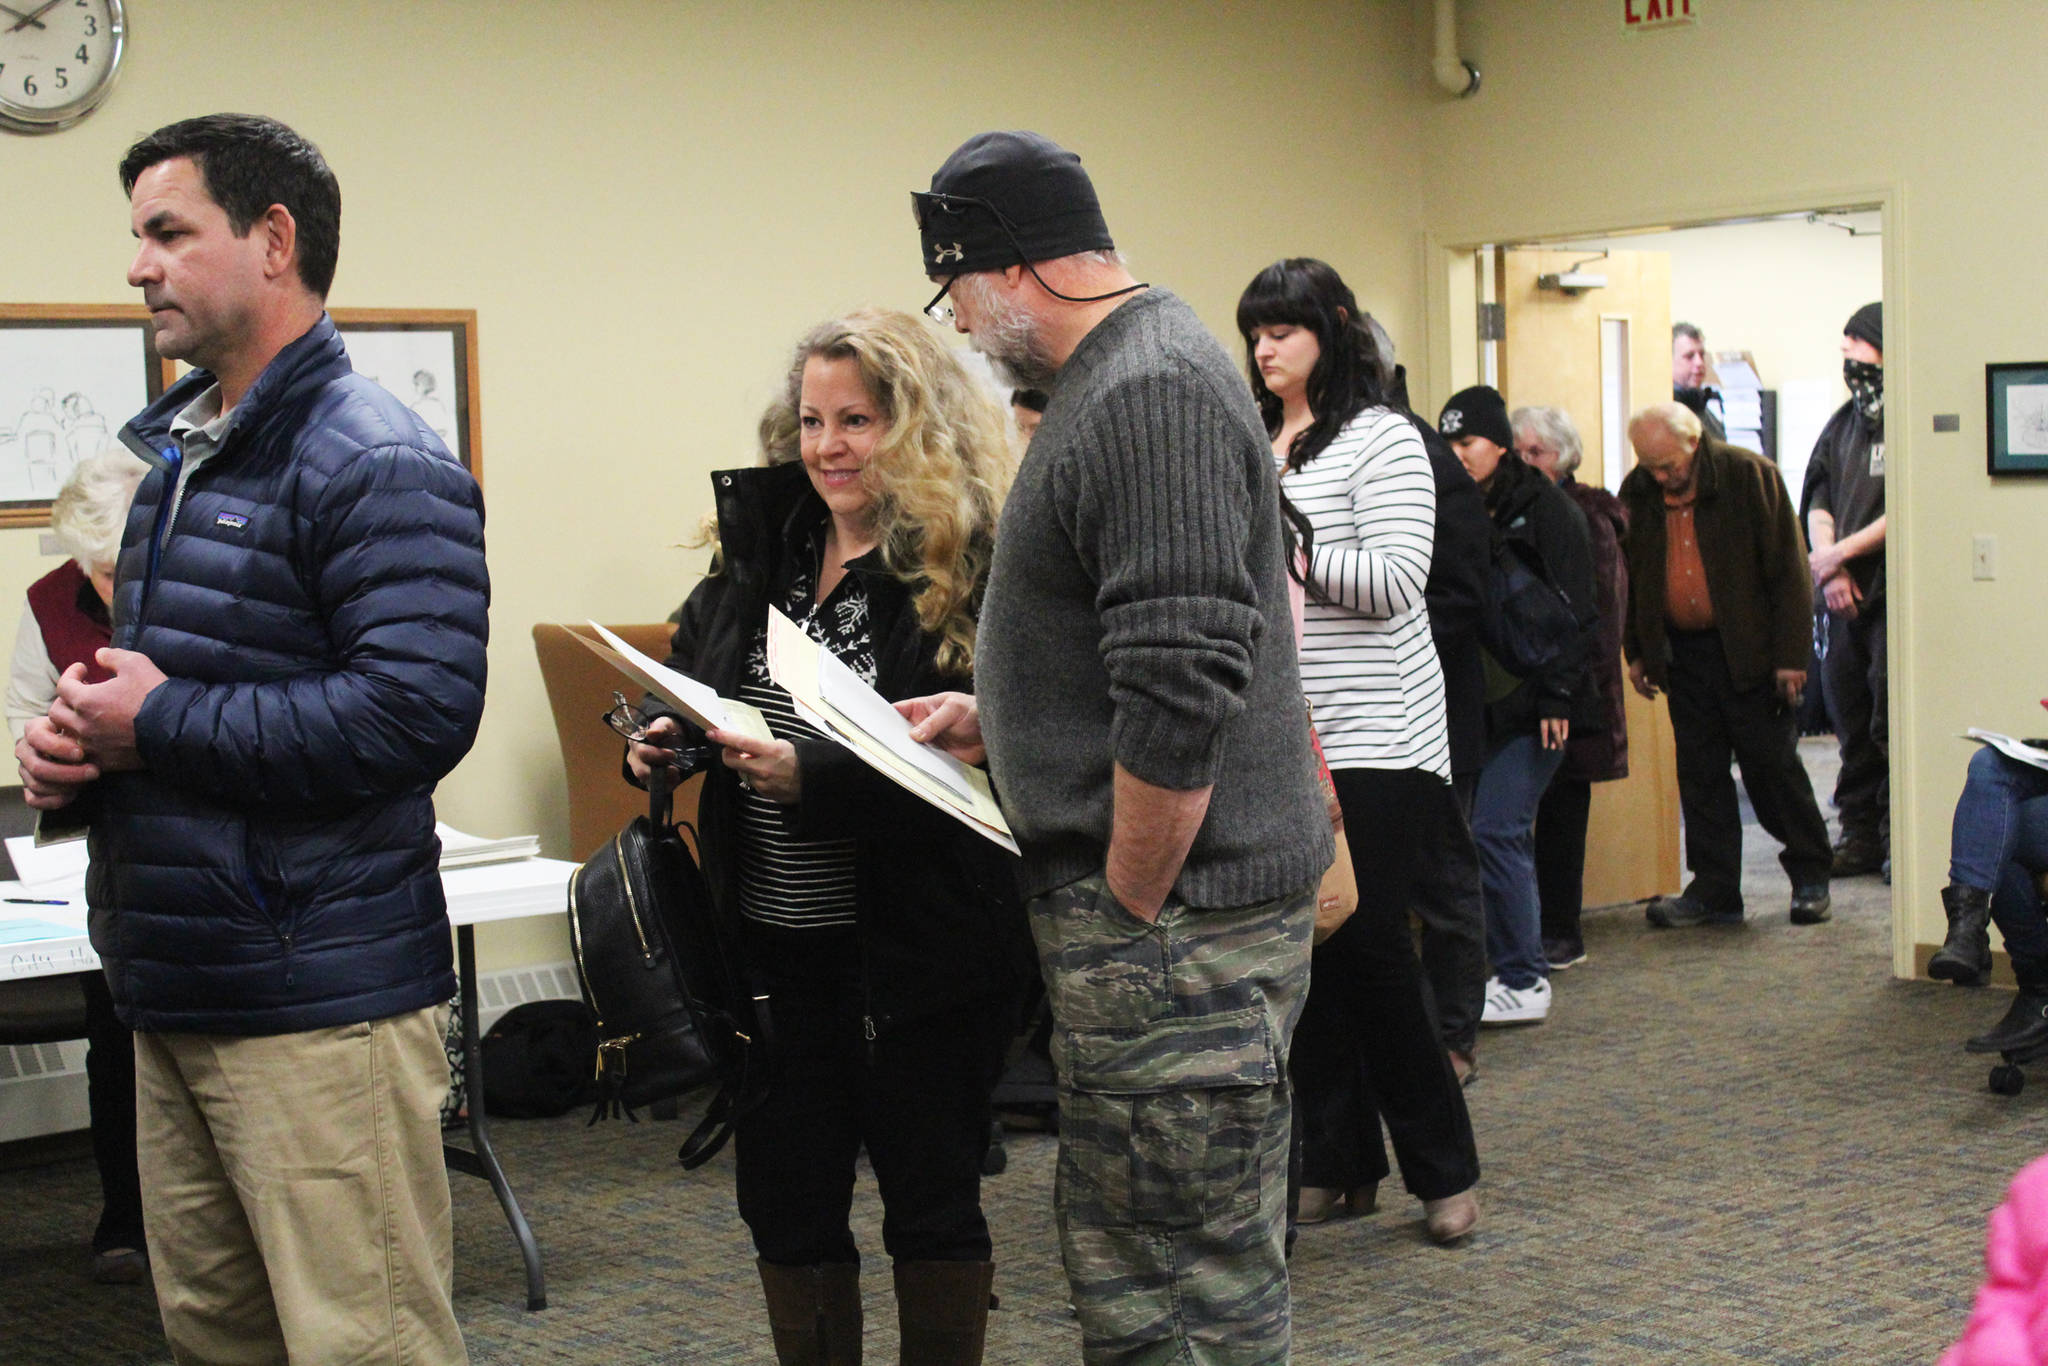 Homer residents wait in line to cast their votes in the 2018 midterm election Tuesday, Nov. 6, 2018 at Homer City Hall in Homer, Alaska. (Photo by Megan Pacer/Homer News)